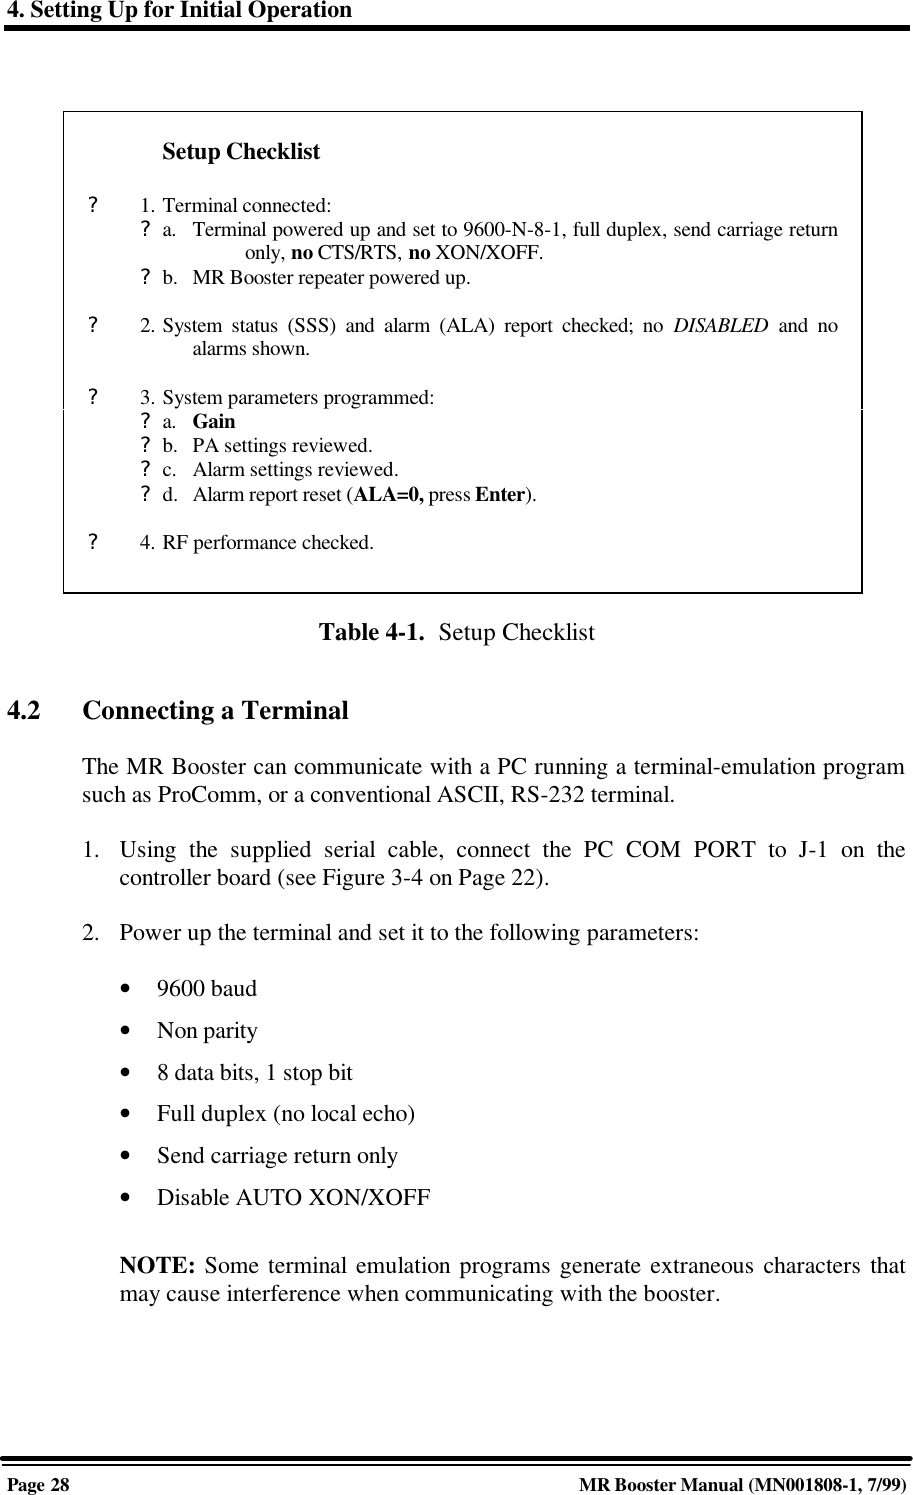 4. Setting Up for Initial OperationPage 28 MR Booster Manual (MN001808-1, 7/99)Table 4-1.  Setup Checklist4.2 Connecting a TerminalThe MR Booster can communicate with a PC running a terminal-emulation programsuch as ProComm, or a conventional ASCII, RS-232 terminal.1. Using the supplied serial cable, connect the PC COM PORT to J-1 on thecontroller board (see Figure 3-4 on Page 22).2. Power up the terminal and set it to the following parameters:• 9600 baud• Non parity• 8 data bits, 1 stop bit• Full duplex (no local echo)• Send carriage return only• Disable AUTO XON/XOFFNOTE: Some terminal emulation programs generate extraneous characters thatmay cause interference when communicating with the booster.Setup Checklist?1. Terminal connected:?a. Terminal powered up and set to 9600-N-8-1, full duplex, send carriage returnonly, no CTS/RTS, no XON/XOFF.?b. MR Booster repeater powered up.?2. System status (SSS) and alarm (ALA) report checked; no DISABLED  and noalarms shown.?3. System parameters programmed:?a. Gain?b. PA settings reviewed.?c. Alarm settings reviewed.?d. Alarm report reset (ALA=0, press Enter).?4. RF performance checked.